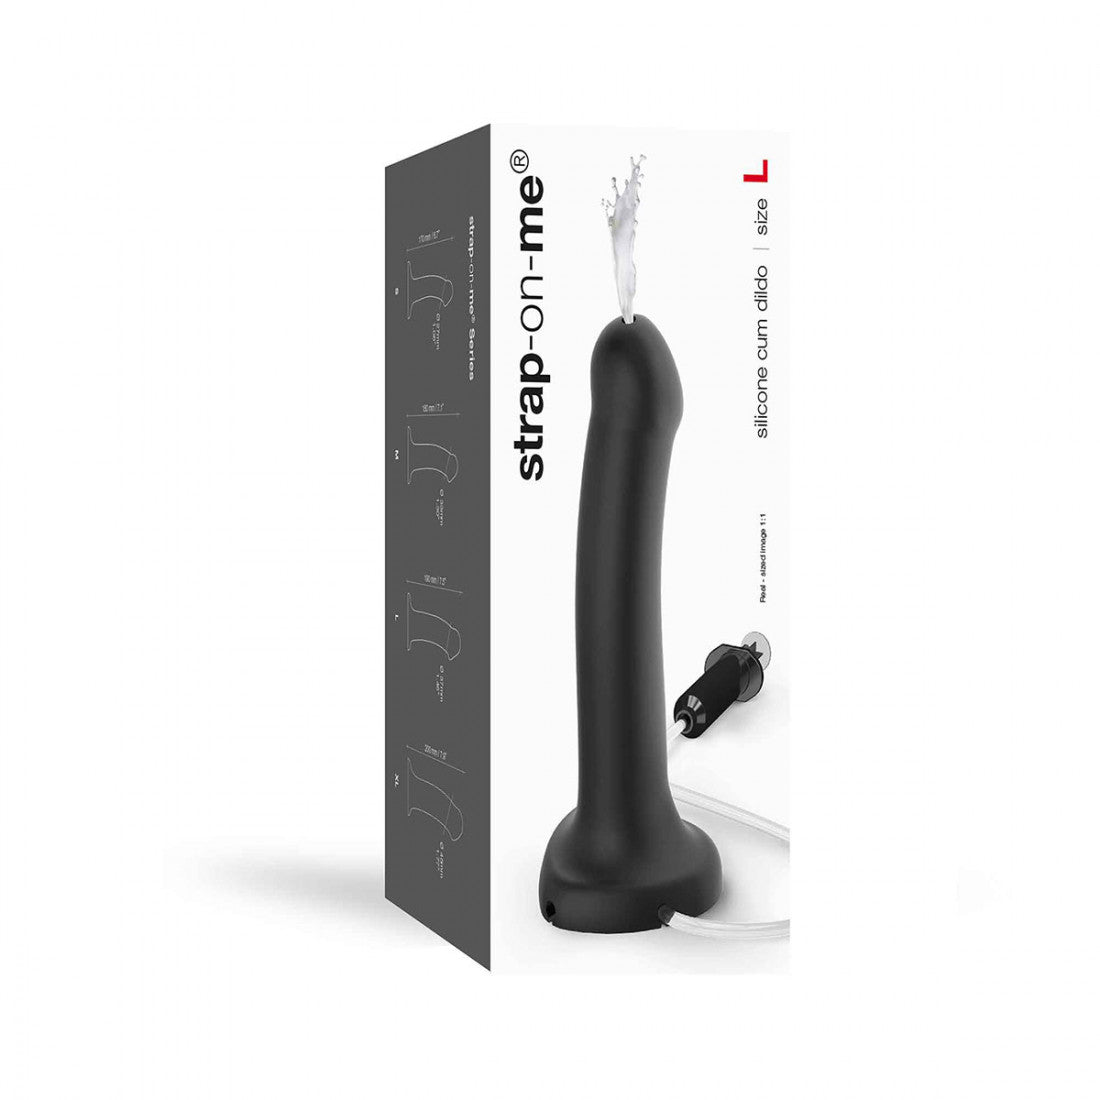 The packaging for the black Strap-On-Me Cum Dildo.